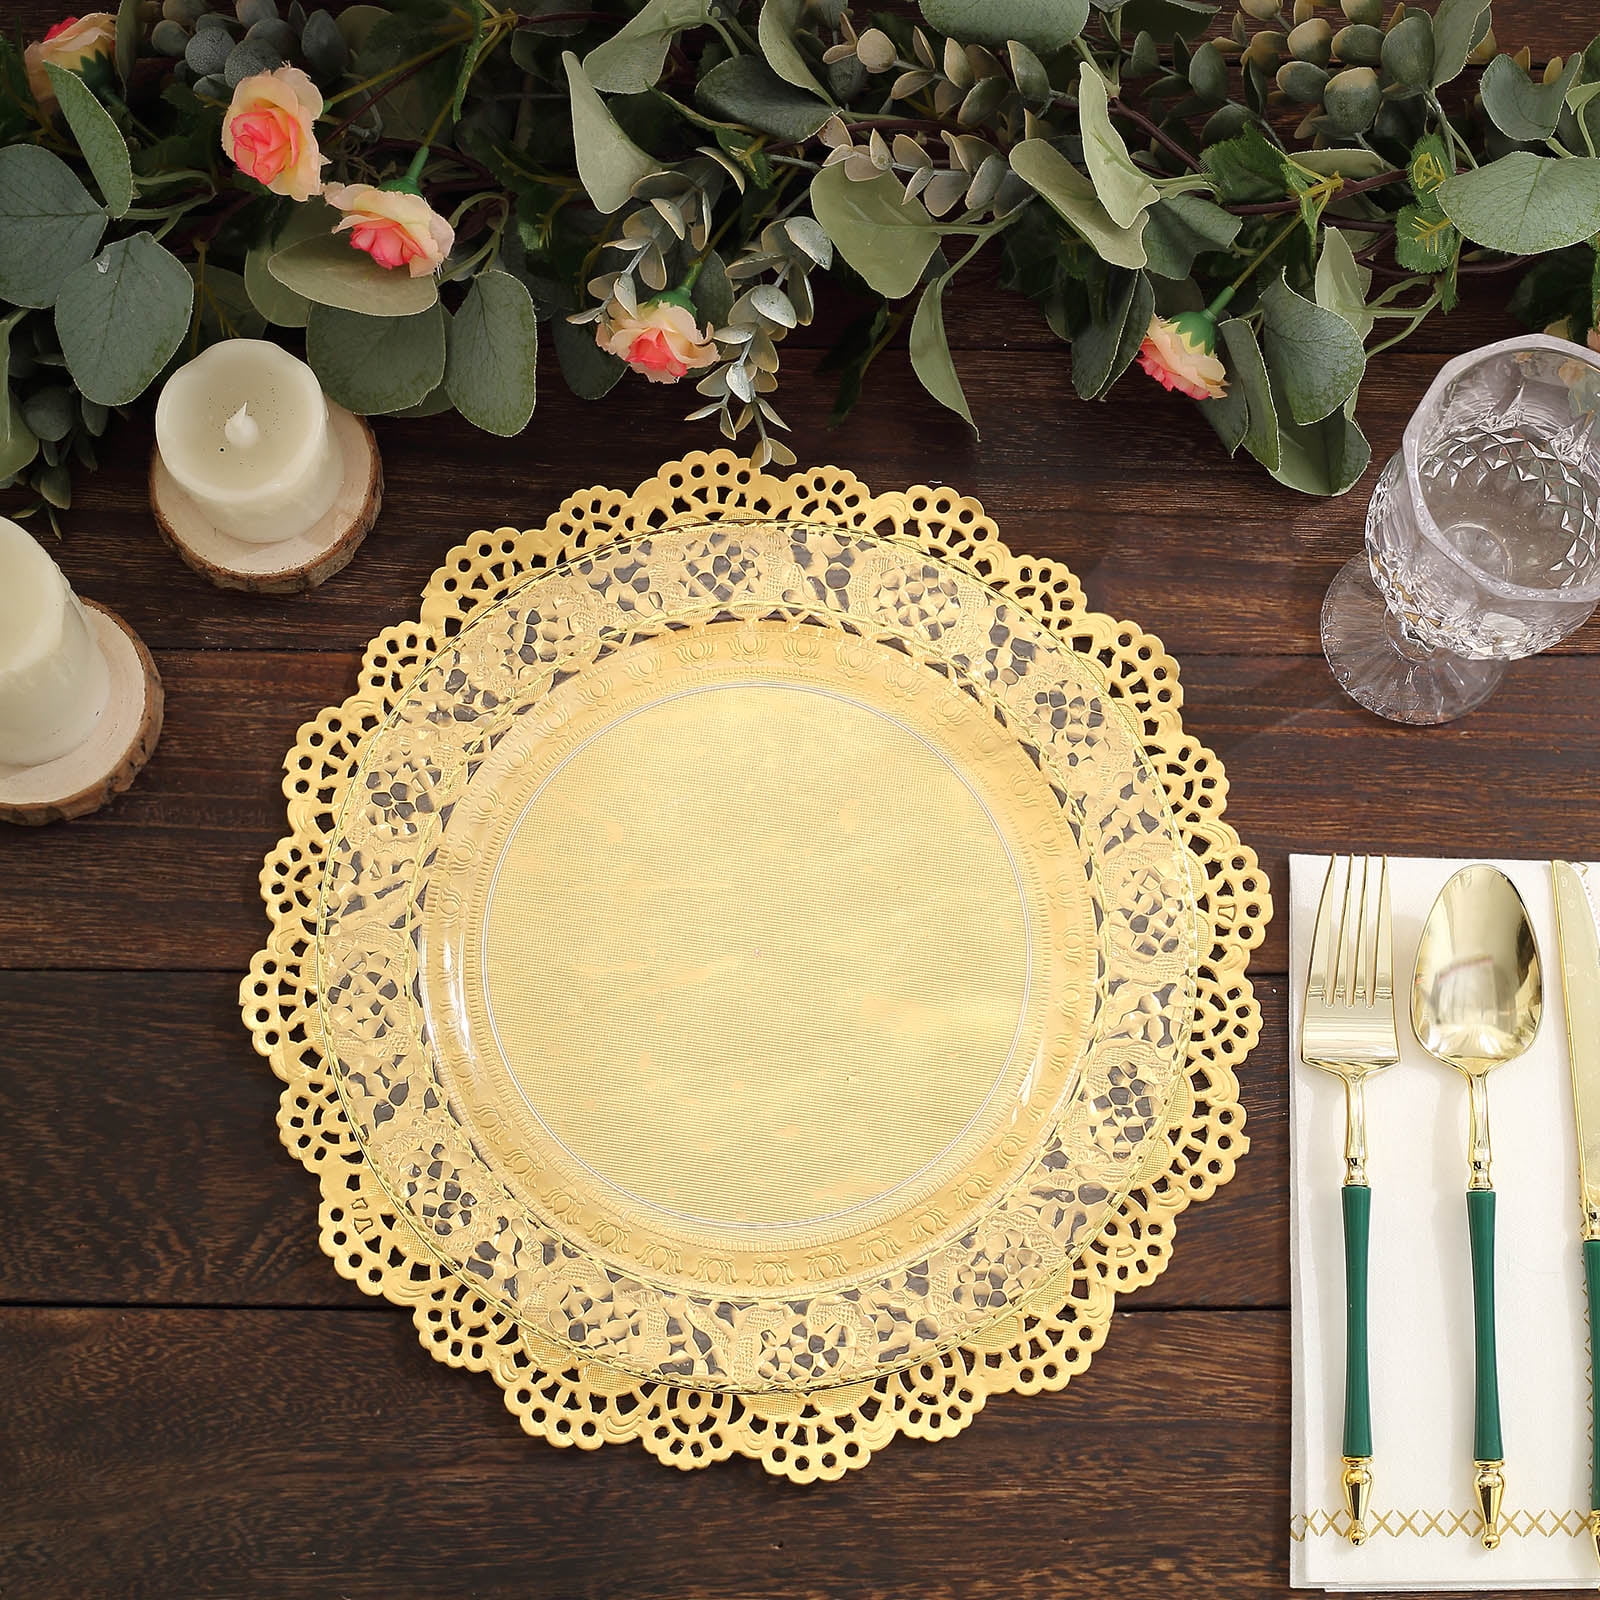 White and Gold Round Party Paper Plates - FiveSeasonStuff